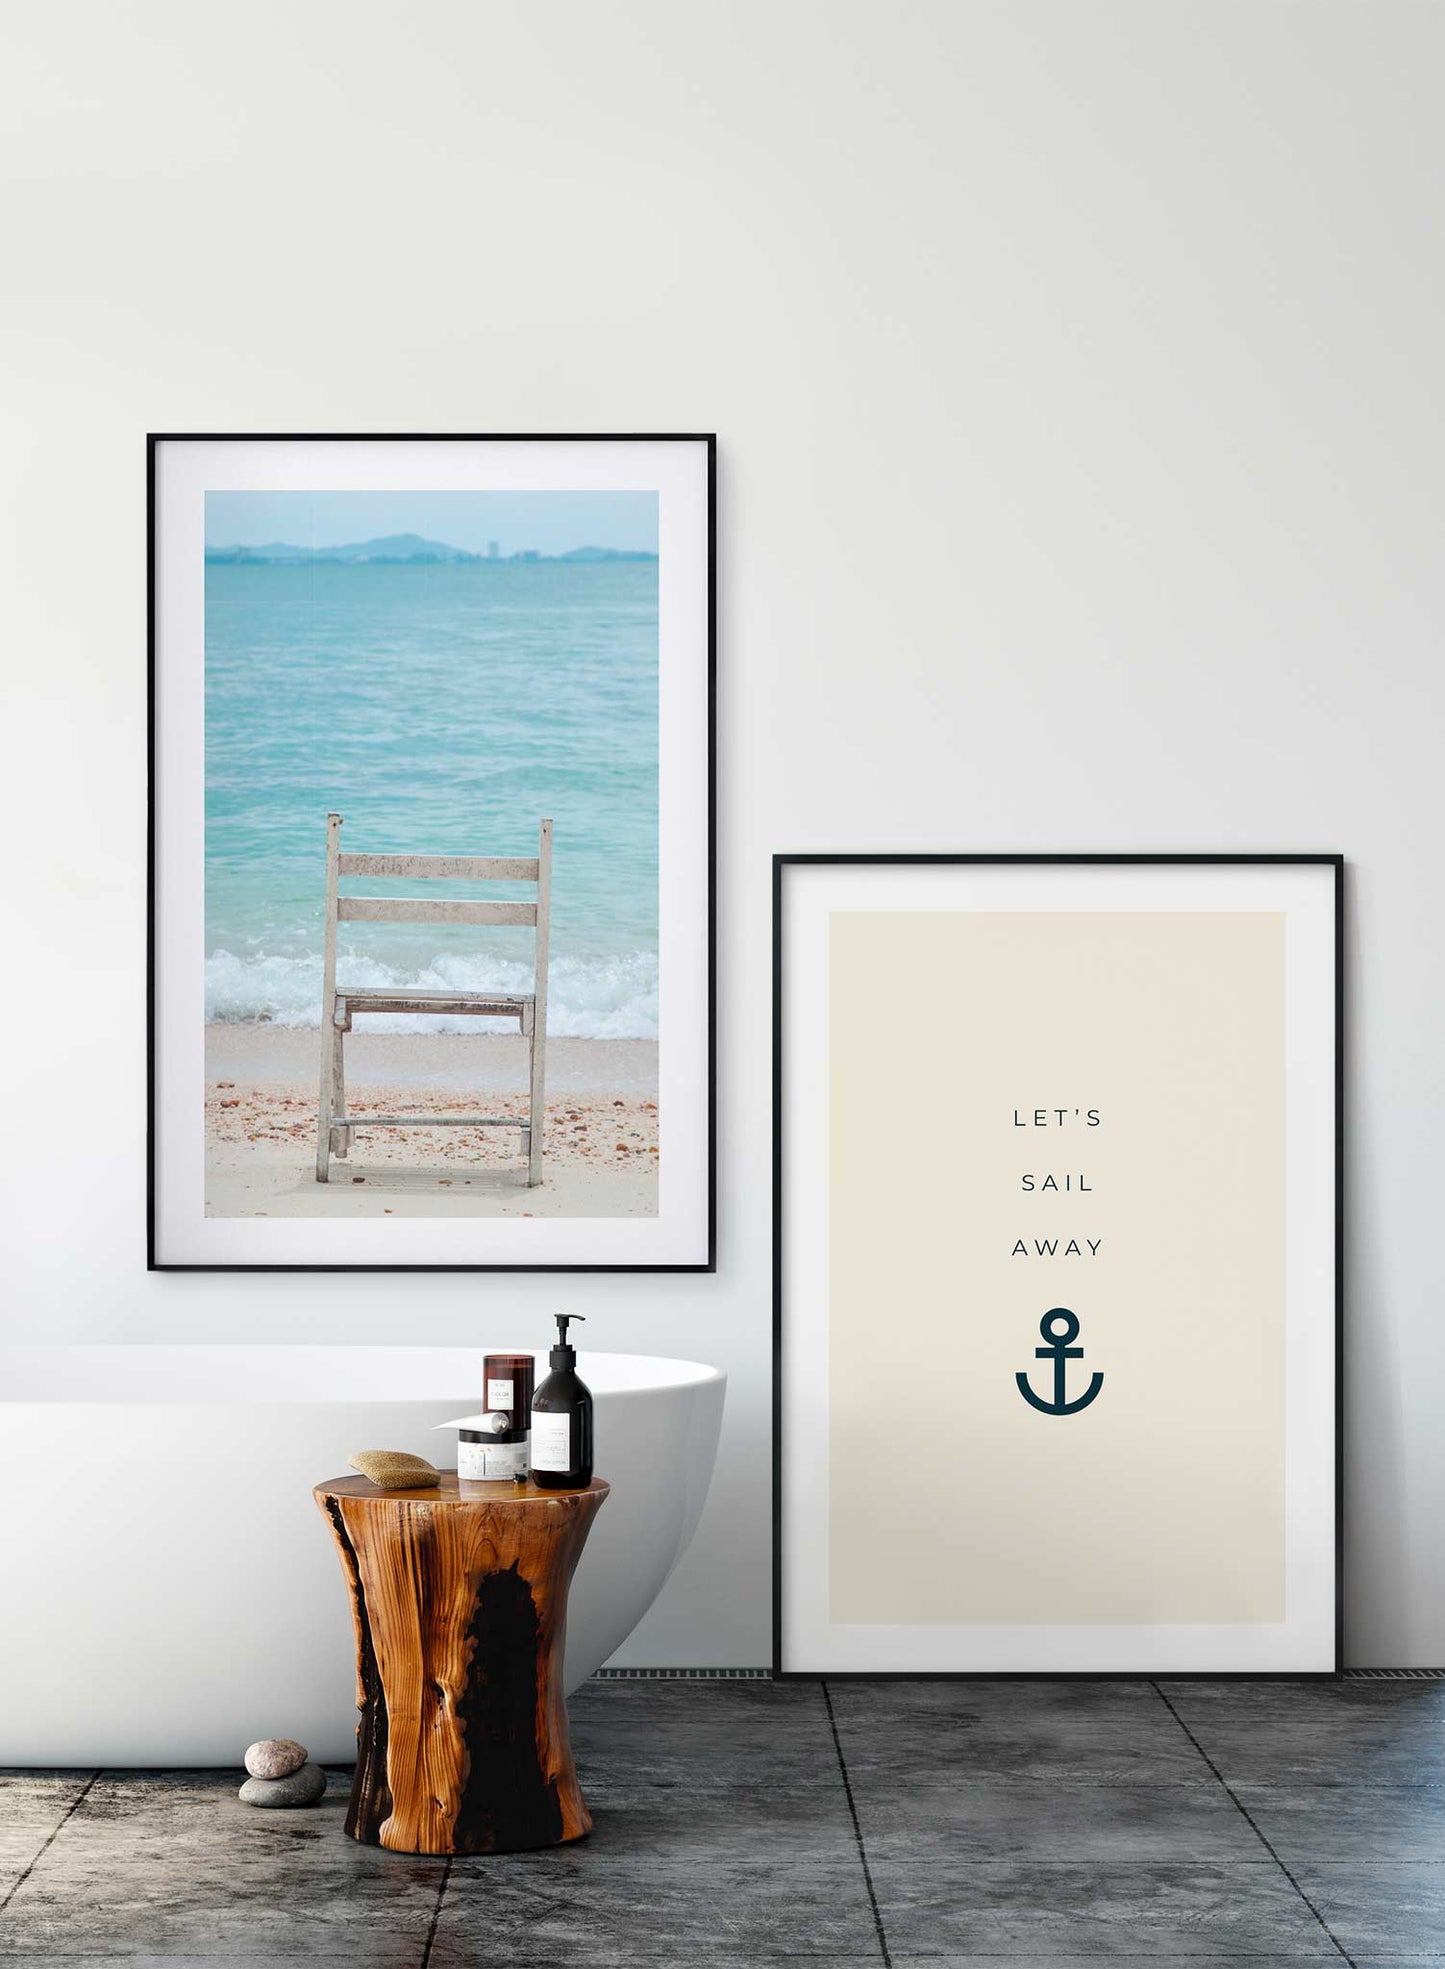 Seaside Spectacle is a minimalist photography of a wood chair on the beach overlooking the scenery of waves crashing onto the shore by Opposite Wall.